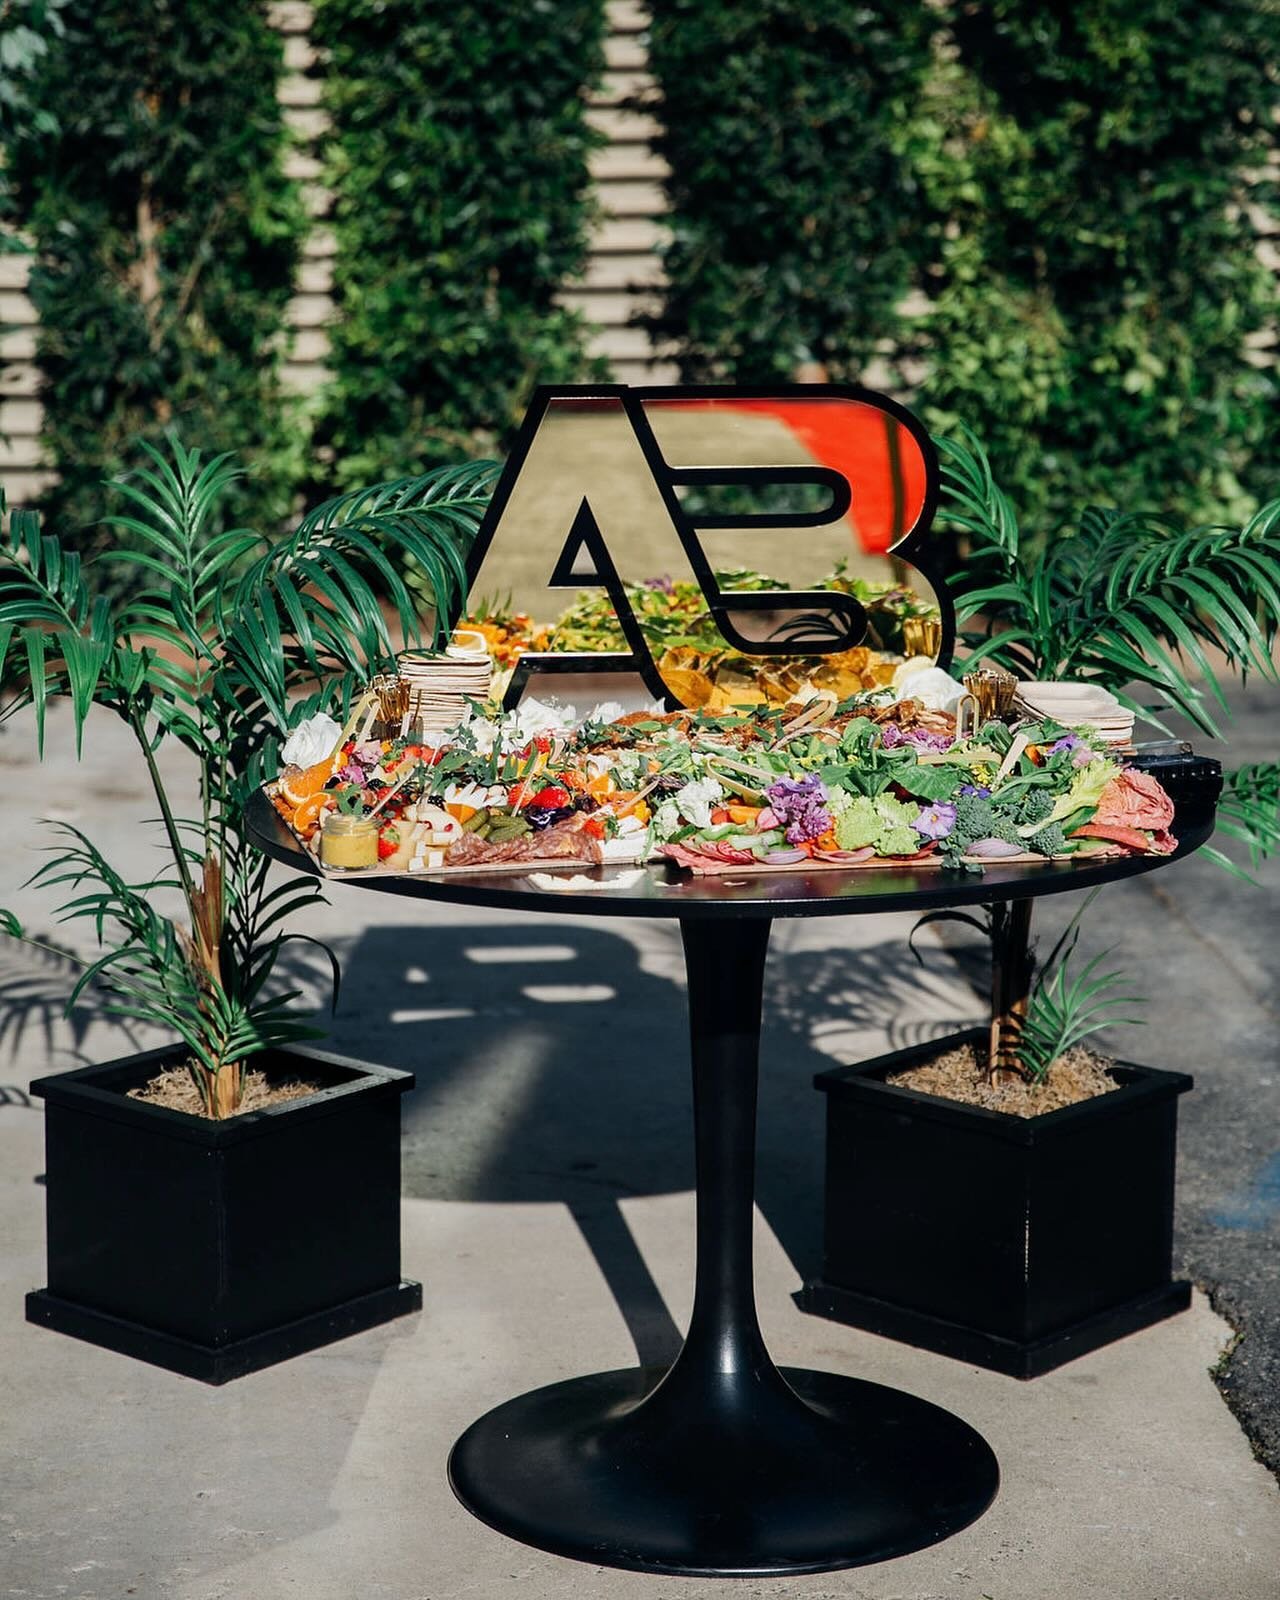 Lady Liberty meets Lady and Larder! Thank you for the fabulous charcuterie and grazing boards - YUM!!

Photographer | @trishaharrisonphotography

#charcuterie #grazingboard #altmanbrothers #grazingtable #eventsignage #grandopening #ribboncutting #che